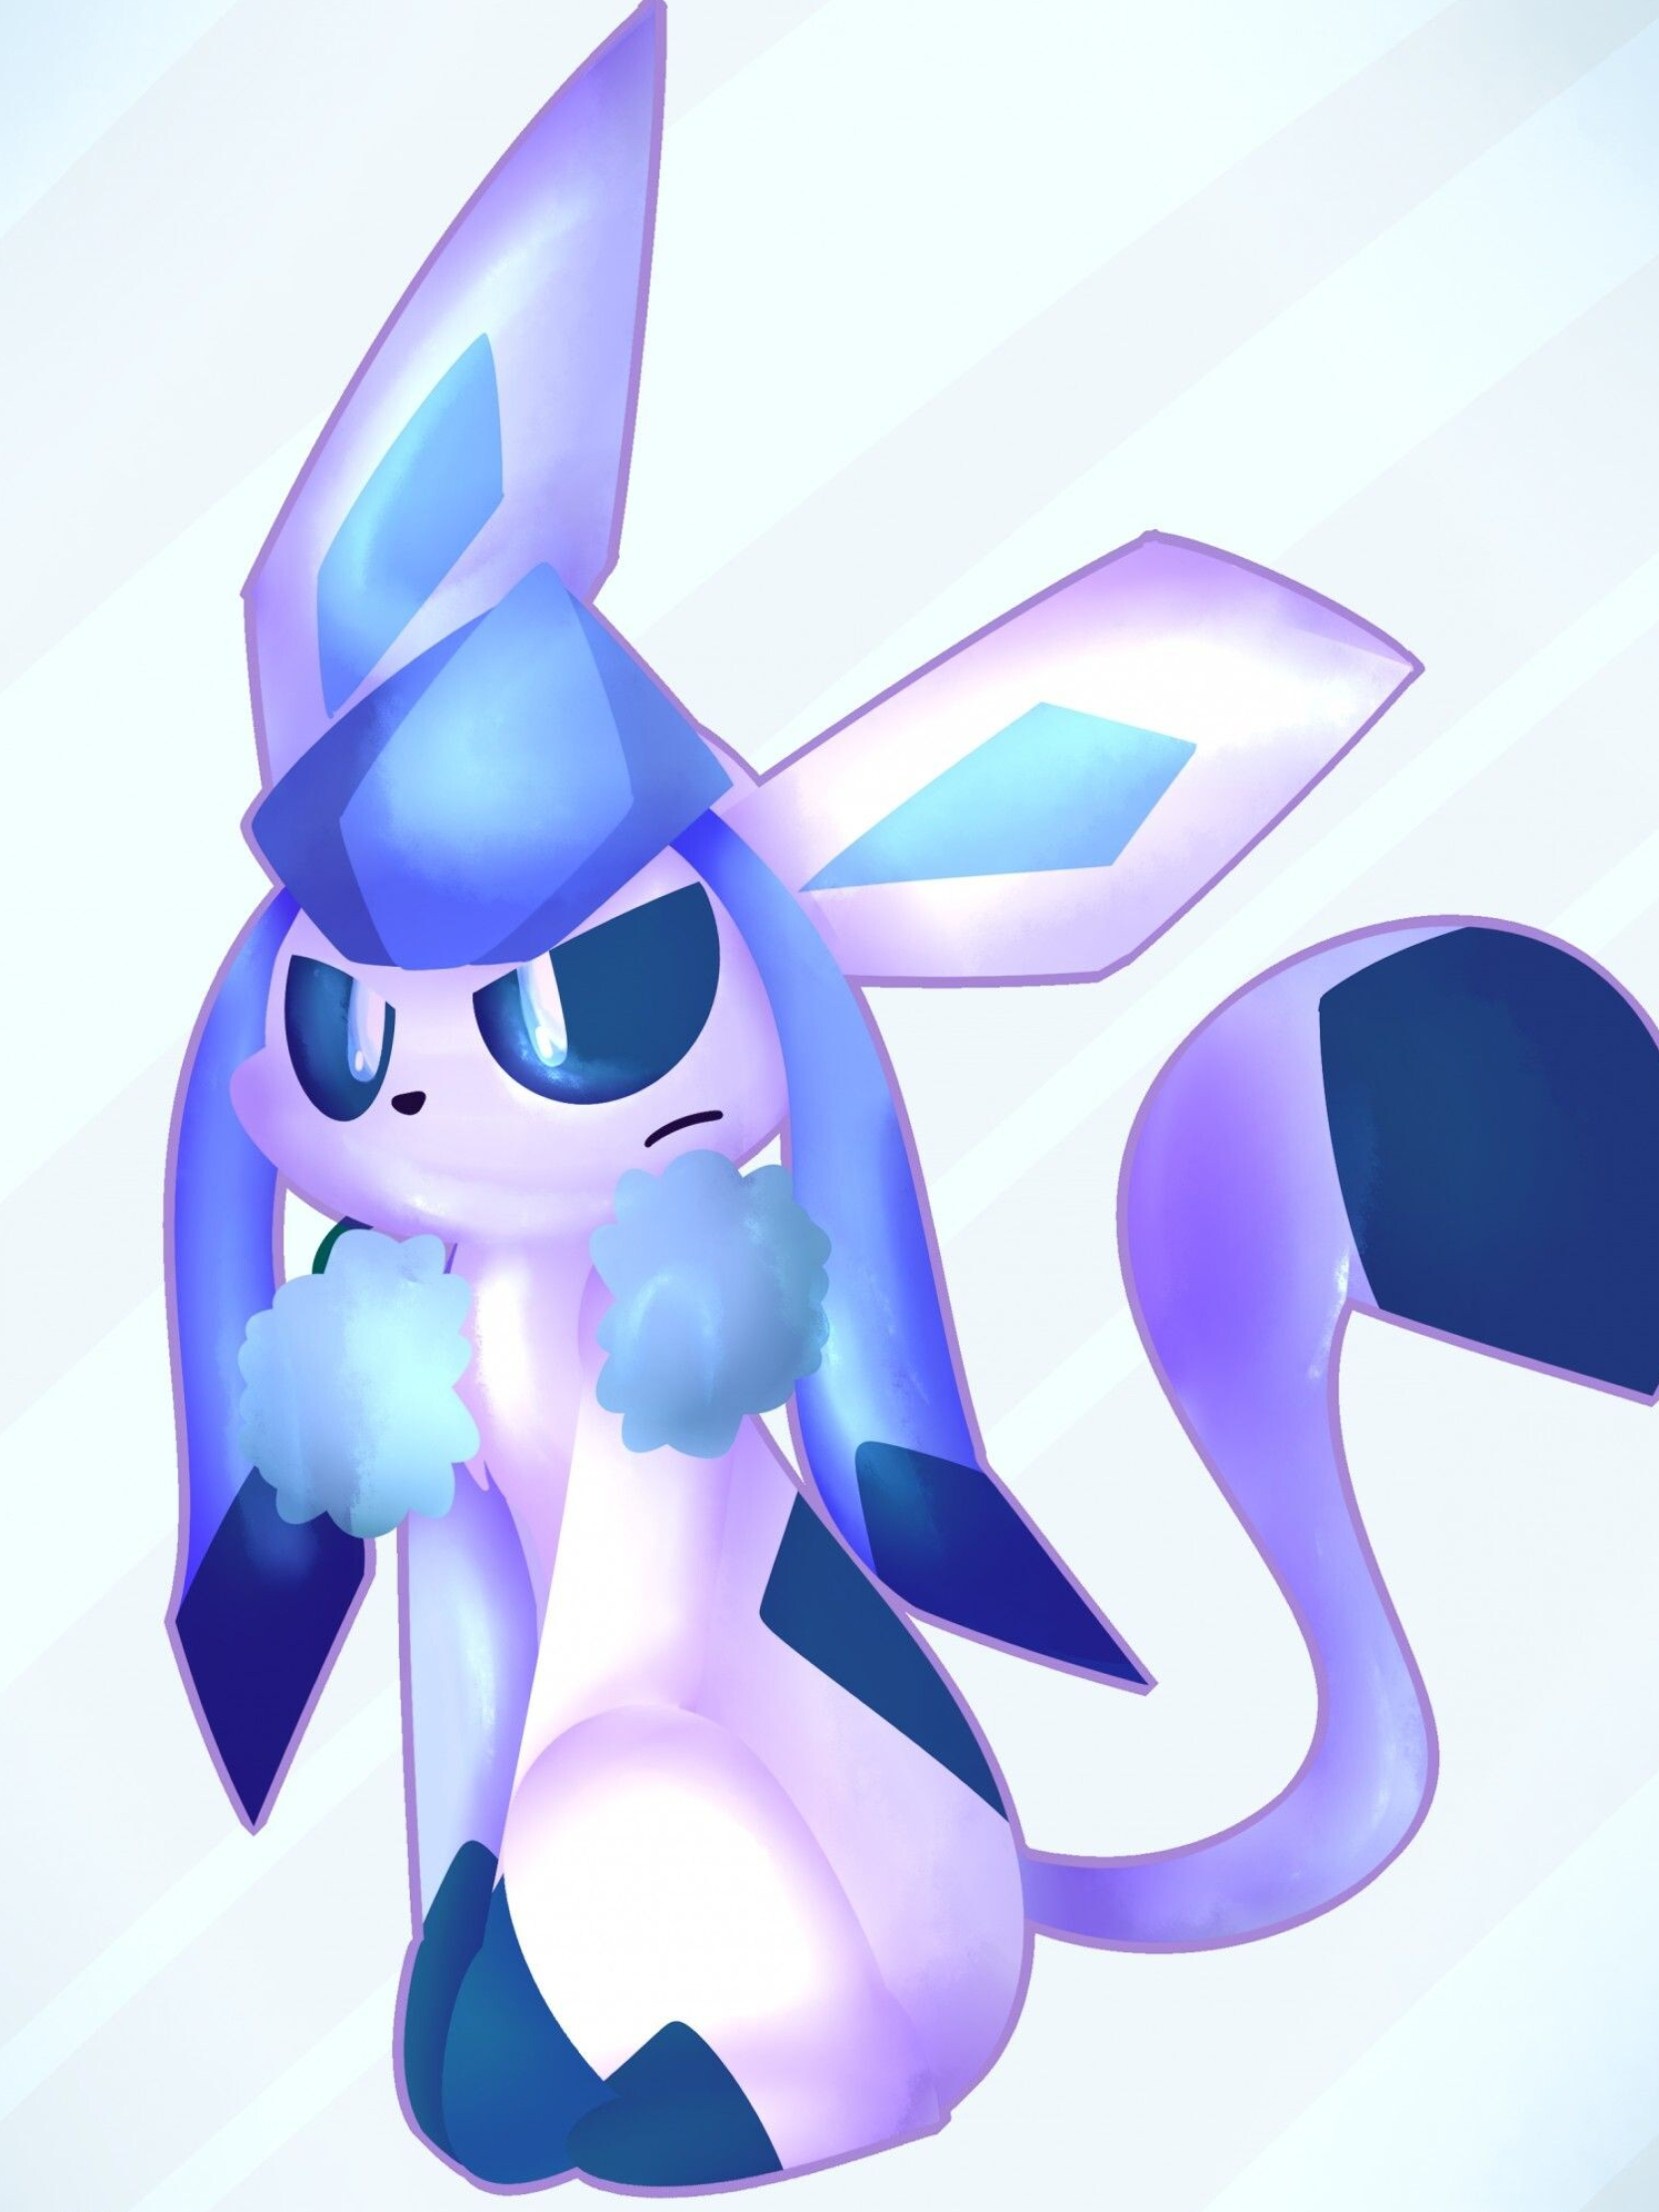 Glaceon: A short muzzle with a small triangular nose, Long pointed ears, A tail with a pointed dark blue diamond-shaped tip. 1670x2230 HD Wallpaper.